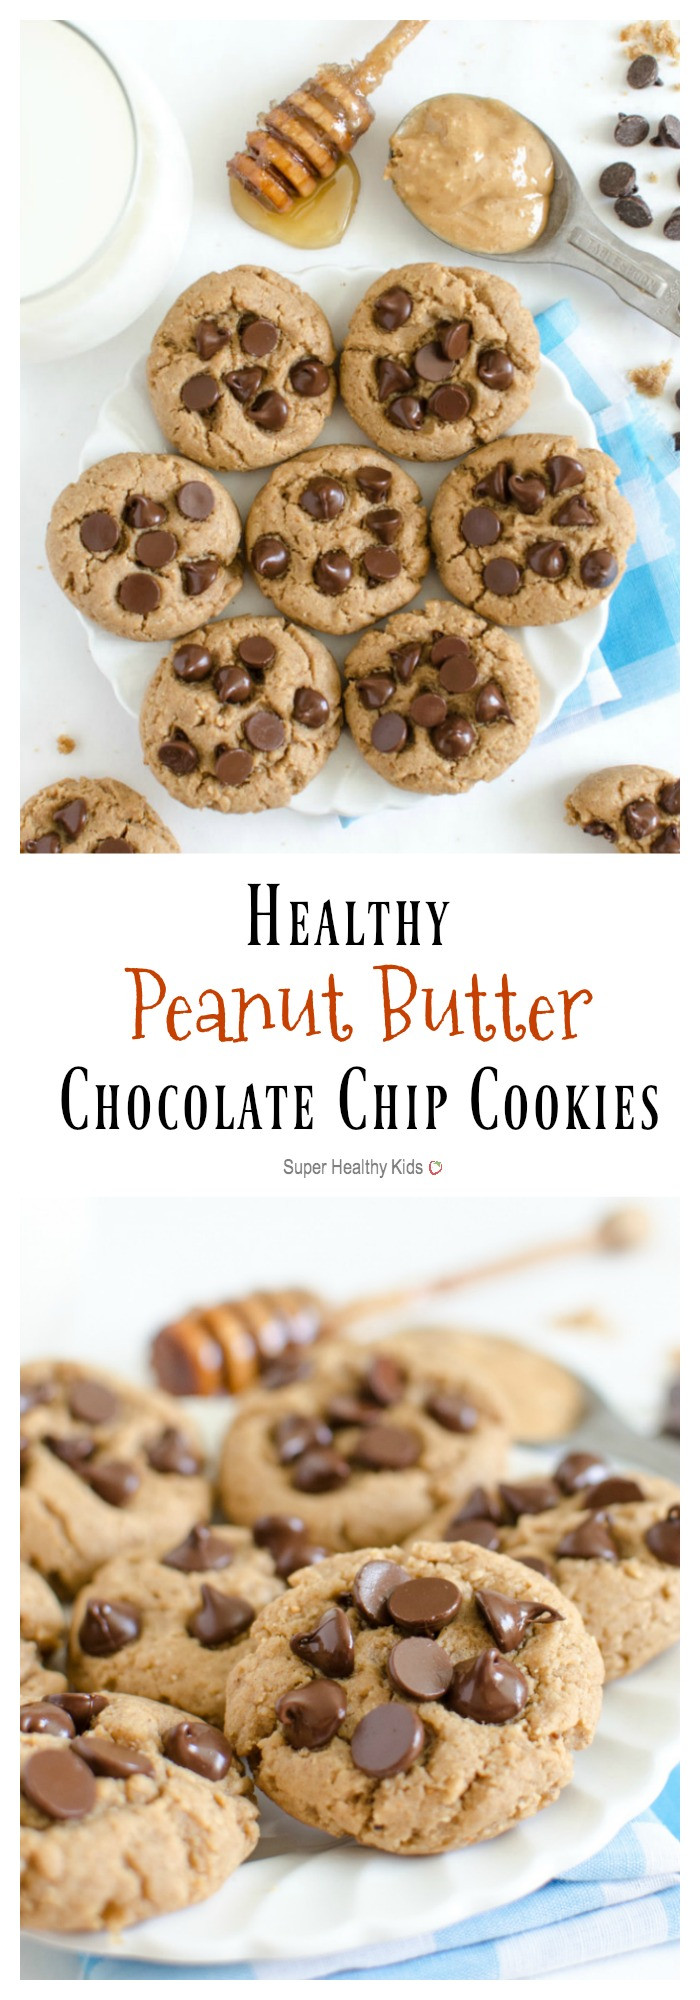 Peanut Butter Cookies With Chocolate Chips
 whole wheat peanut butter chocolate chip cookies